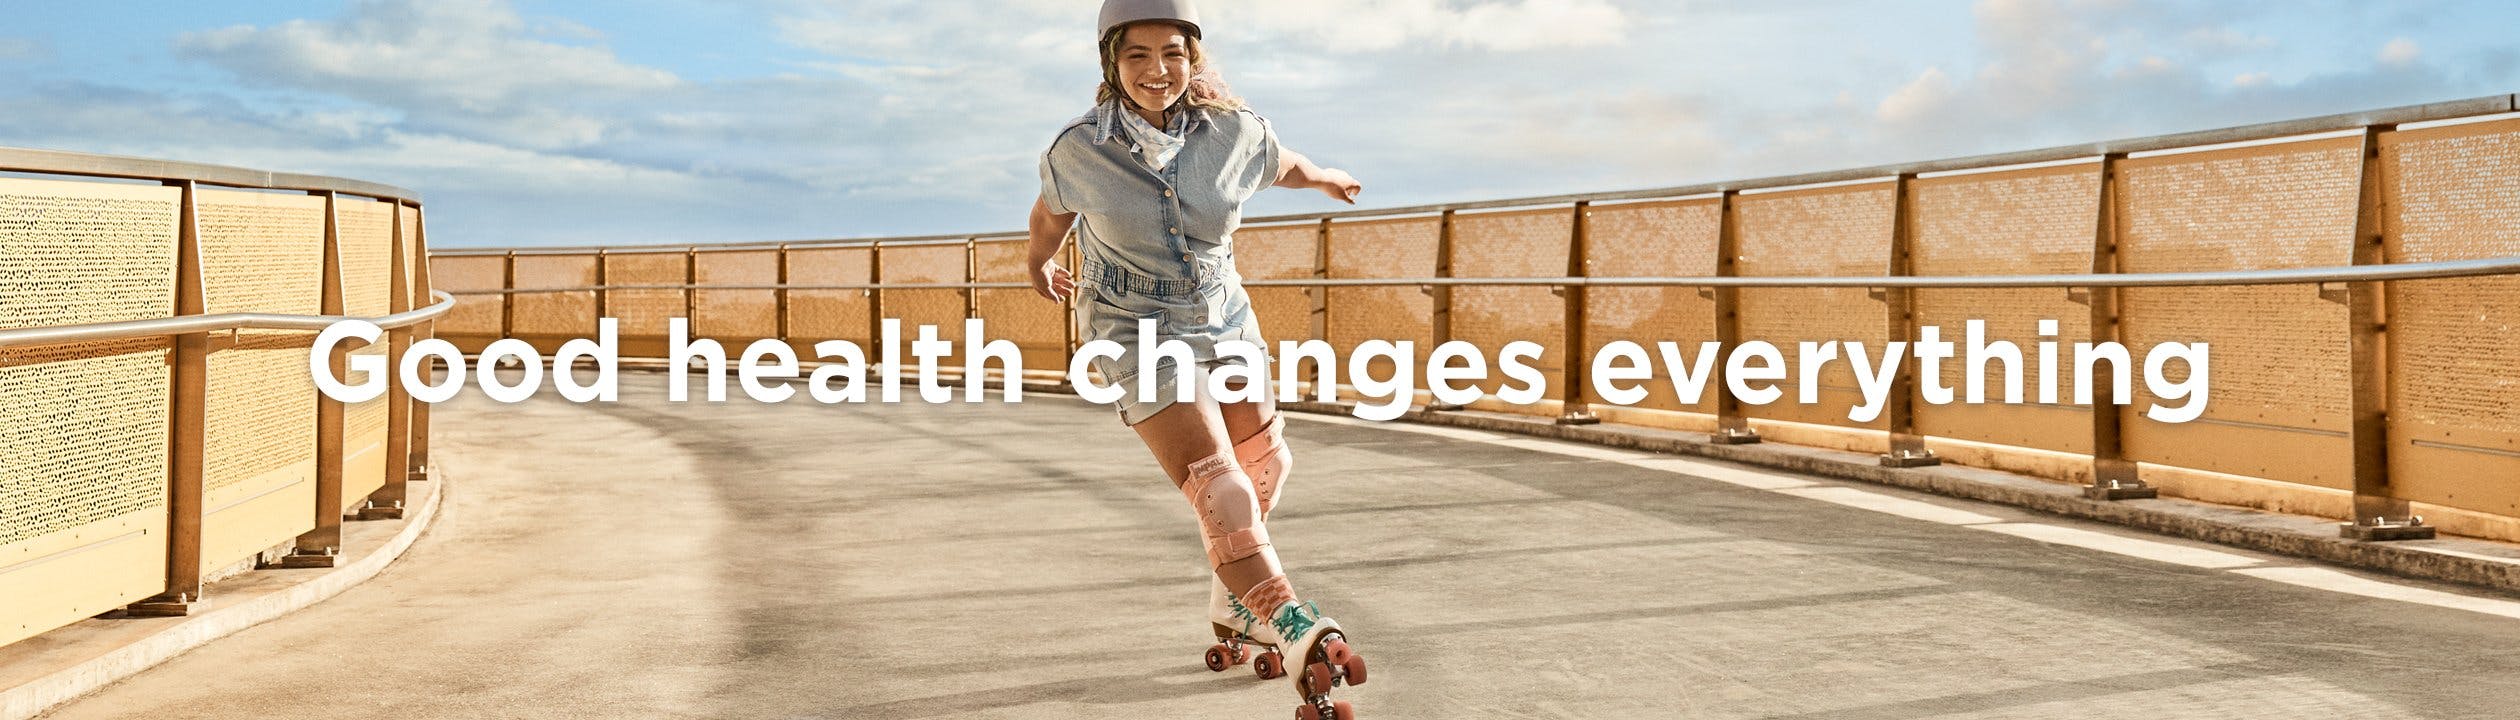 Good health changes everything